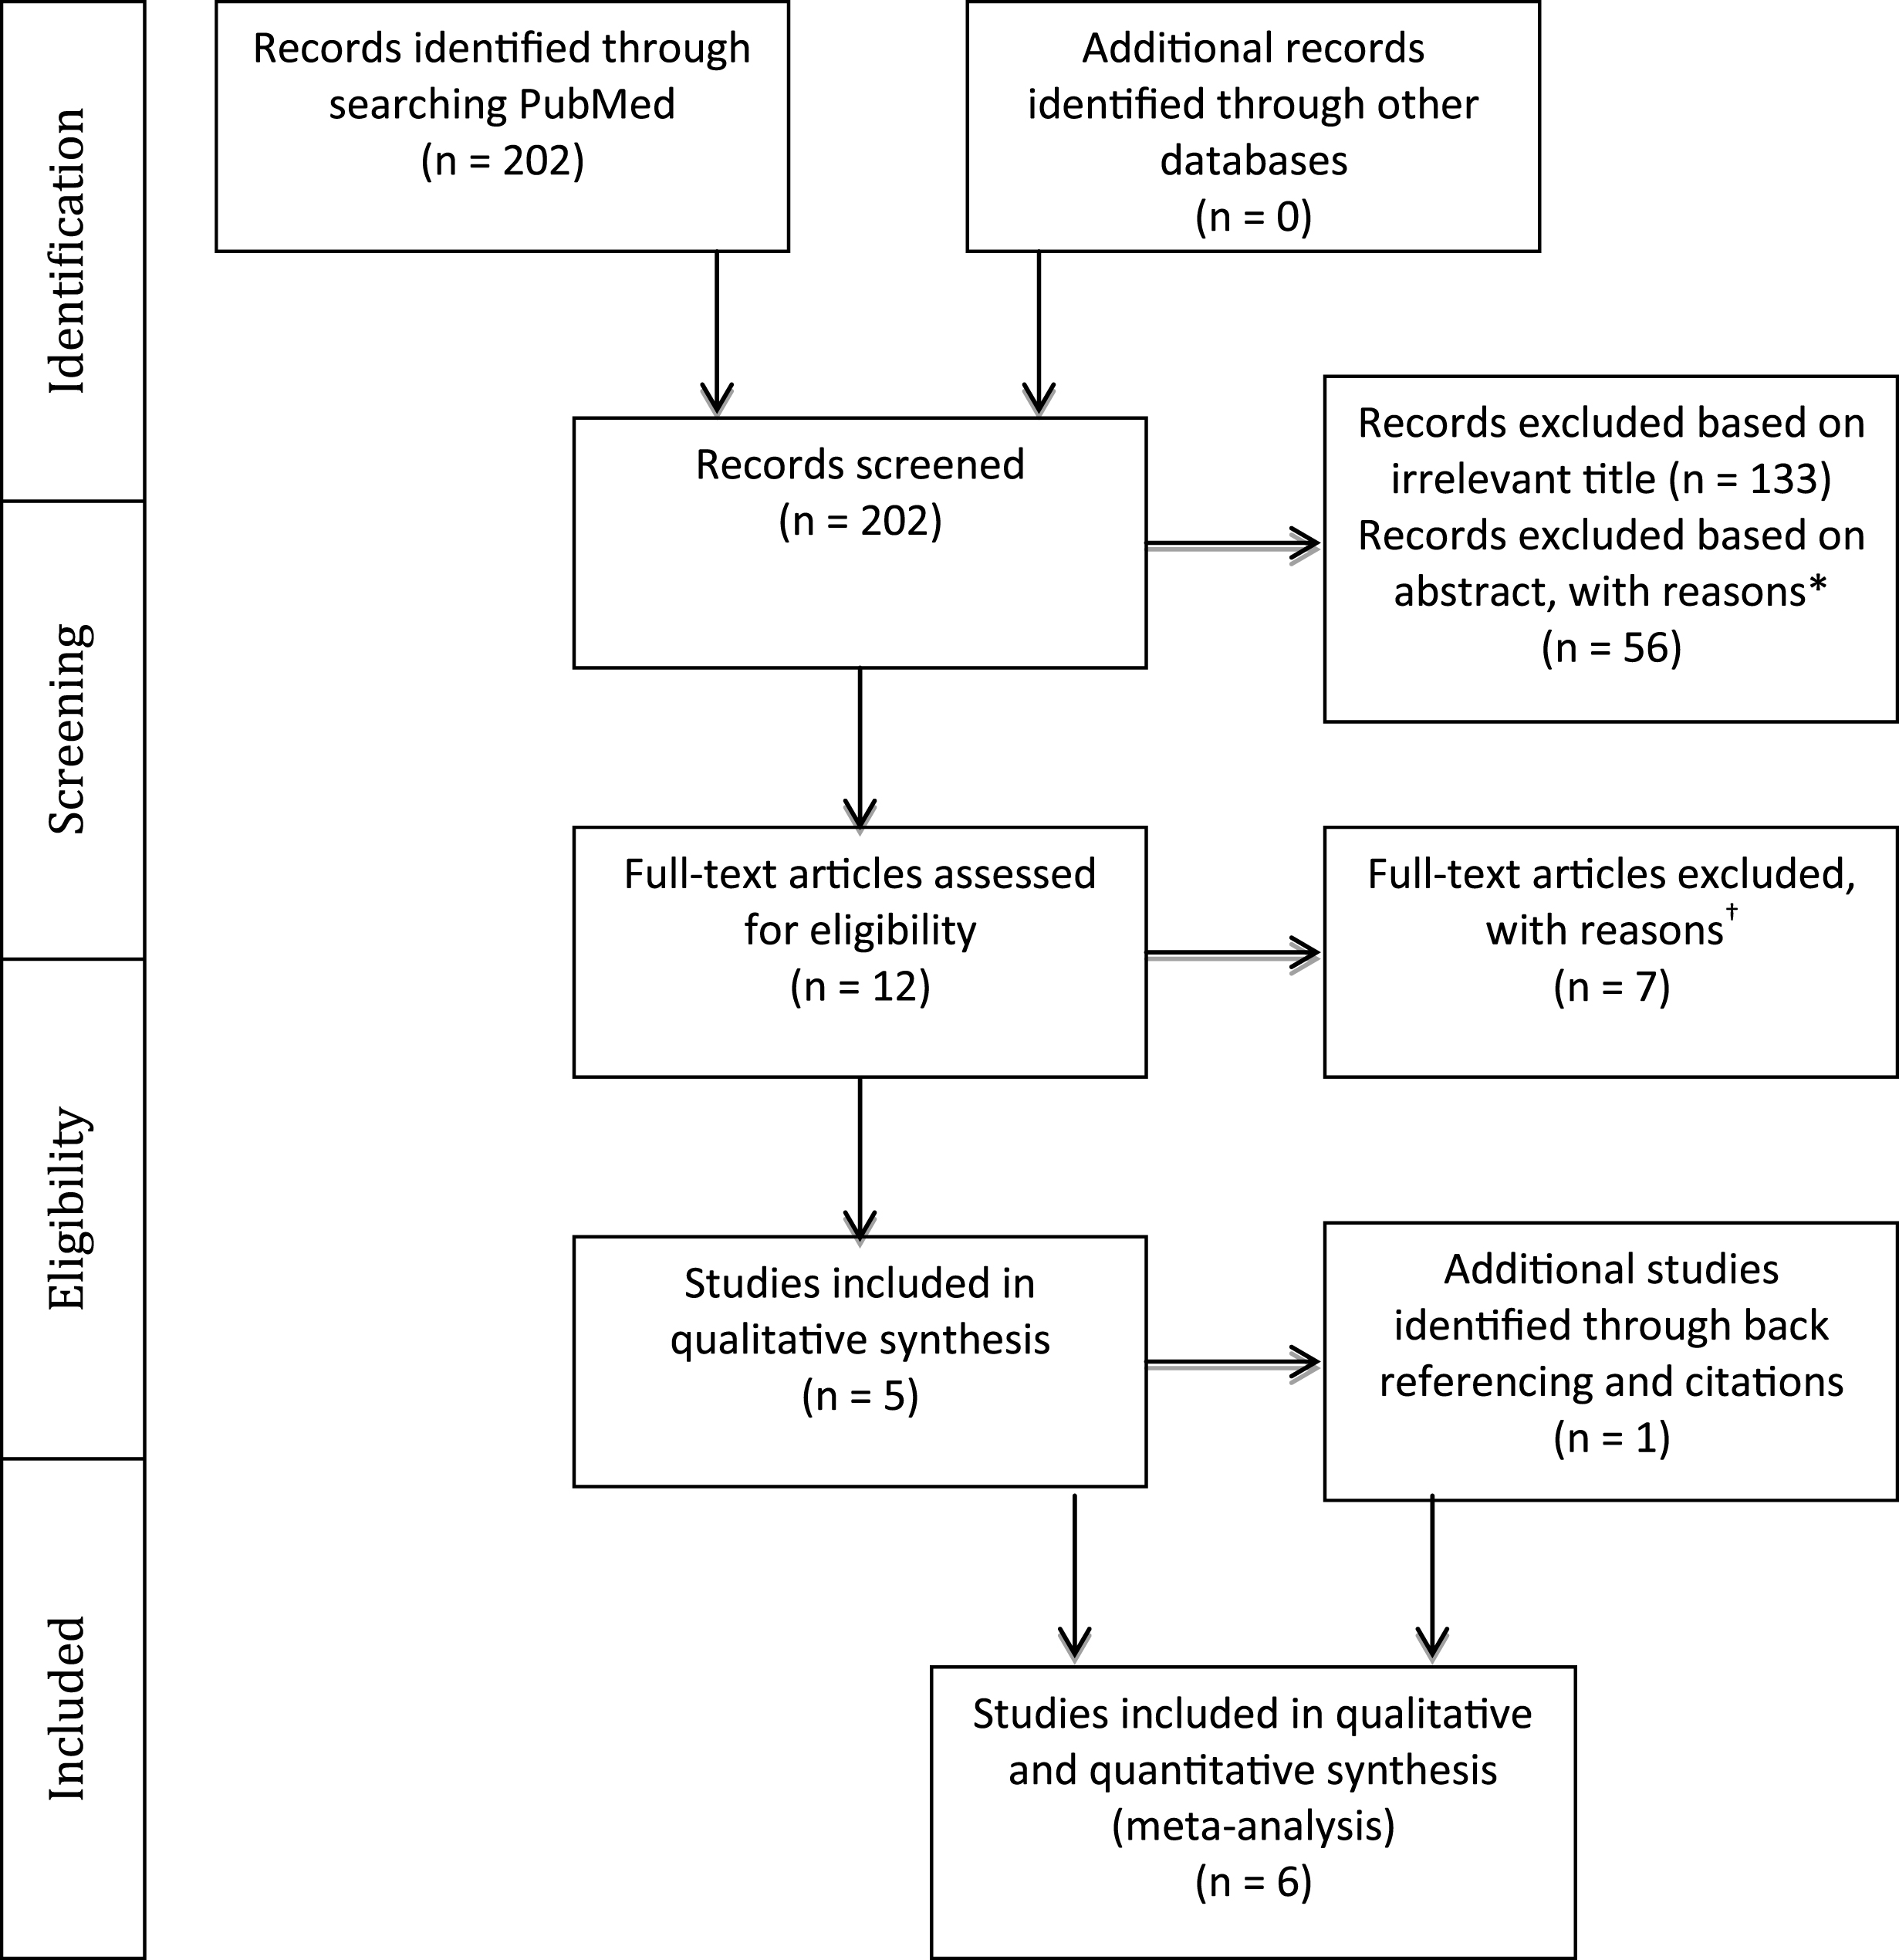 PRISMA Flow Diagram. *Reasons for exclusion: exclusion of persons with impaired cognition (n = 20); no baseline cognitive assessment (n = 16); no upper limb motor outcome (n = 9); no repetitive movement or motor rehabilitation intervention provided (n = 5); Dual task interventions (n = 2); hemispatial neglect was the only cognitive predictor (n = 2); upper limb intervention review paper (n = 1); non-stroke study sample (n = 1)  †Reasons for exclusion: statistical associations between baseline cognition and motor outcome scores were not done and could not be derived from the data provided (n = 5); no baseline cognitive assessment (n = 1); no motor intervention (n = 1).